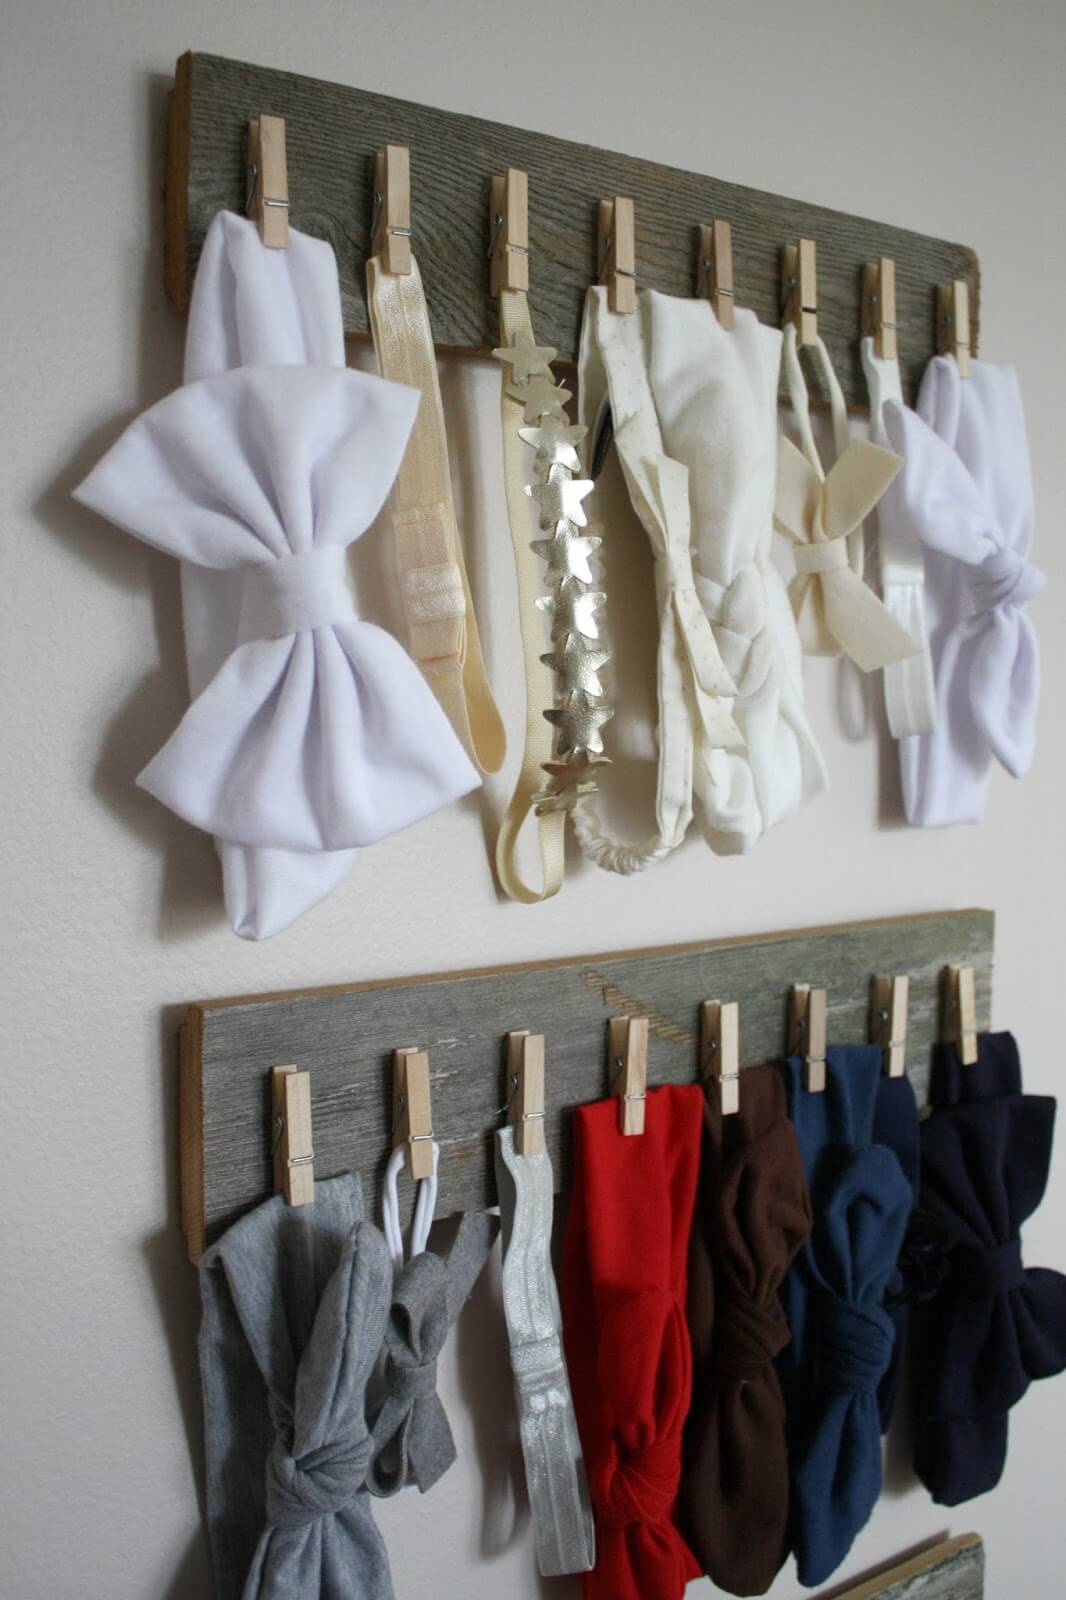 Wood and Clothes Pins Becomes Accessory Organizer